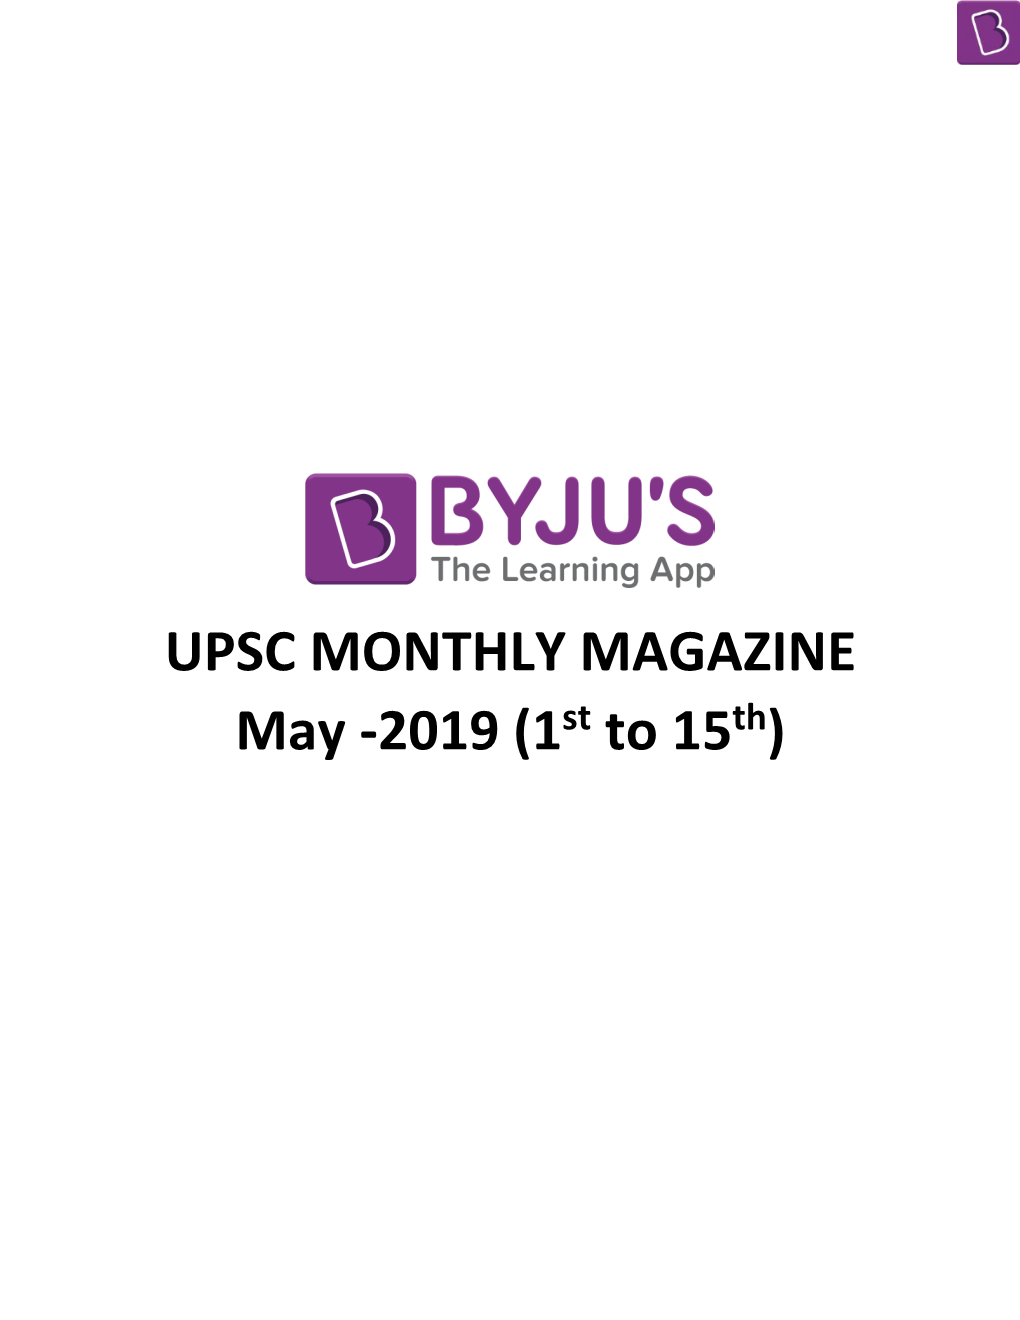 UPSC MONTHLY MAGAZINE May -2019 (1St to 15Th)